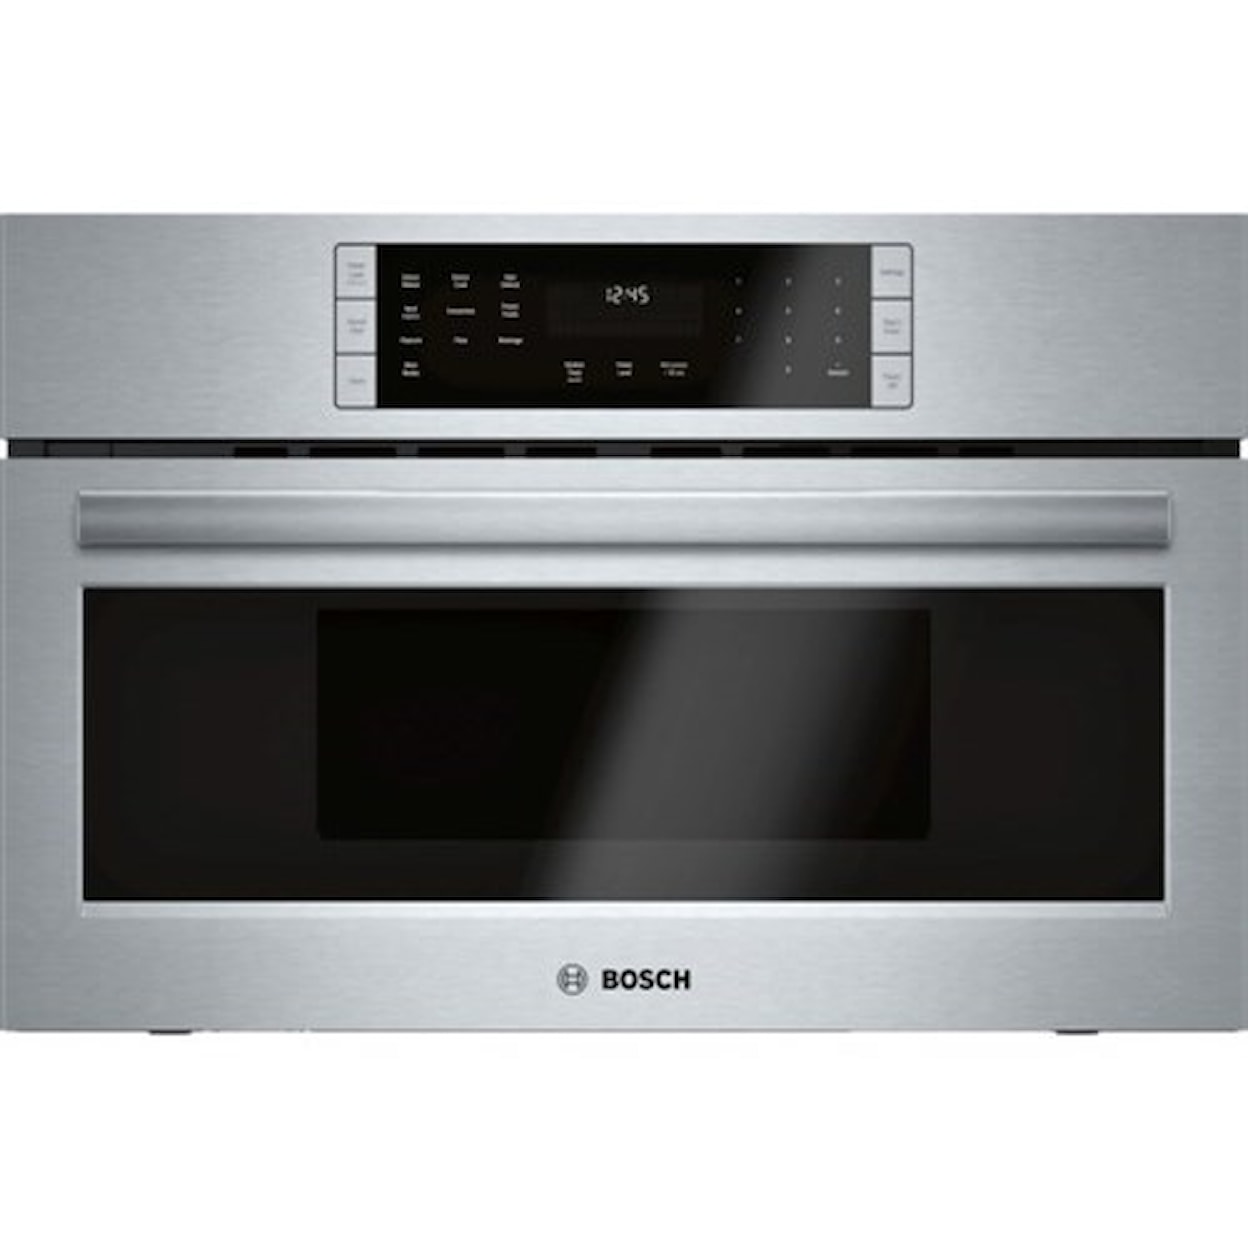 Bosch Microwaves 30" Speed Microwave Oven - 800 Series